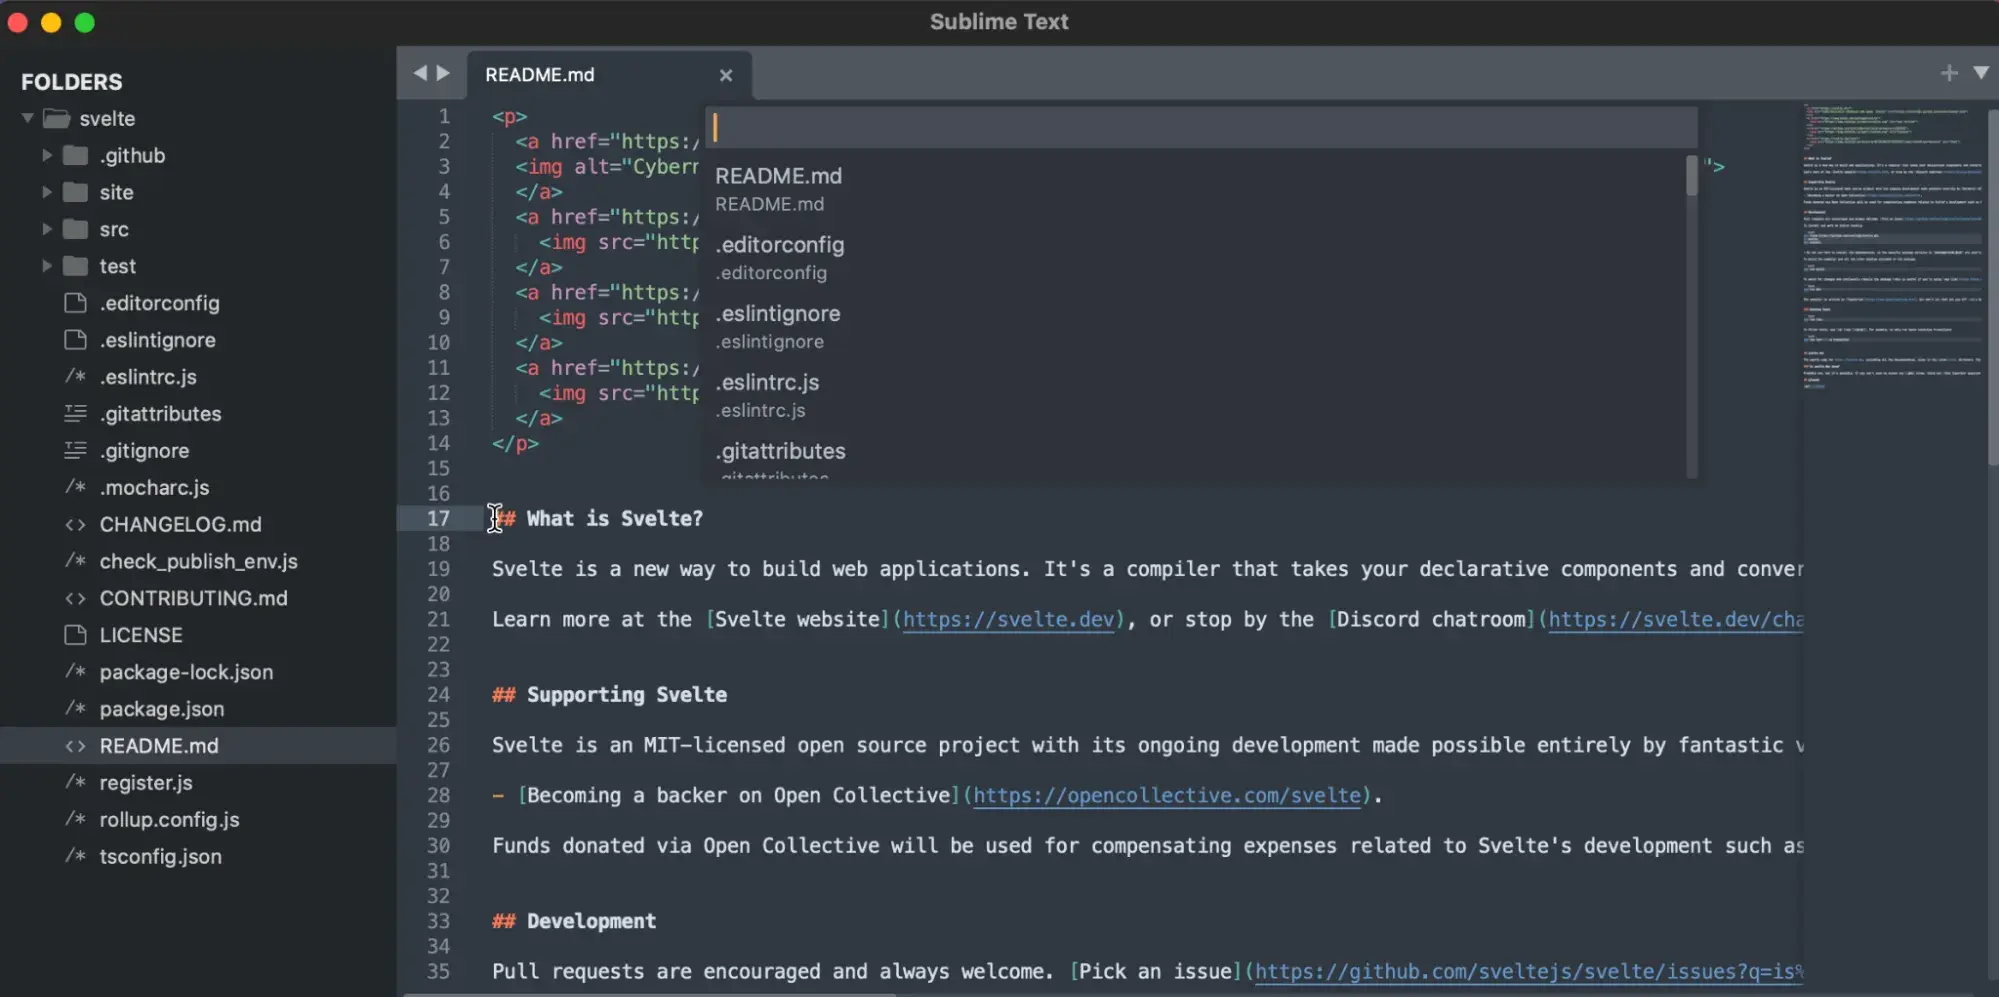 html editor with live preview, sublime